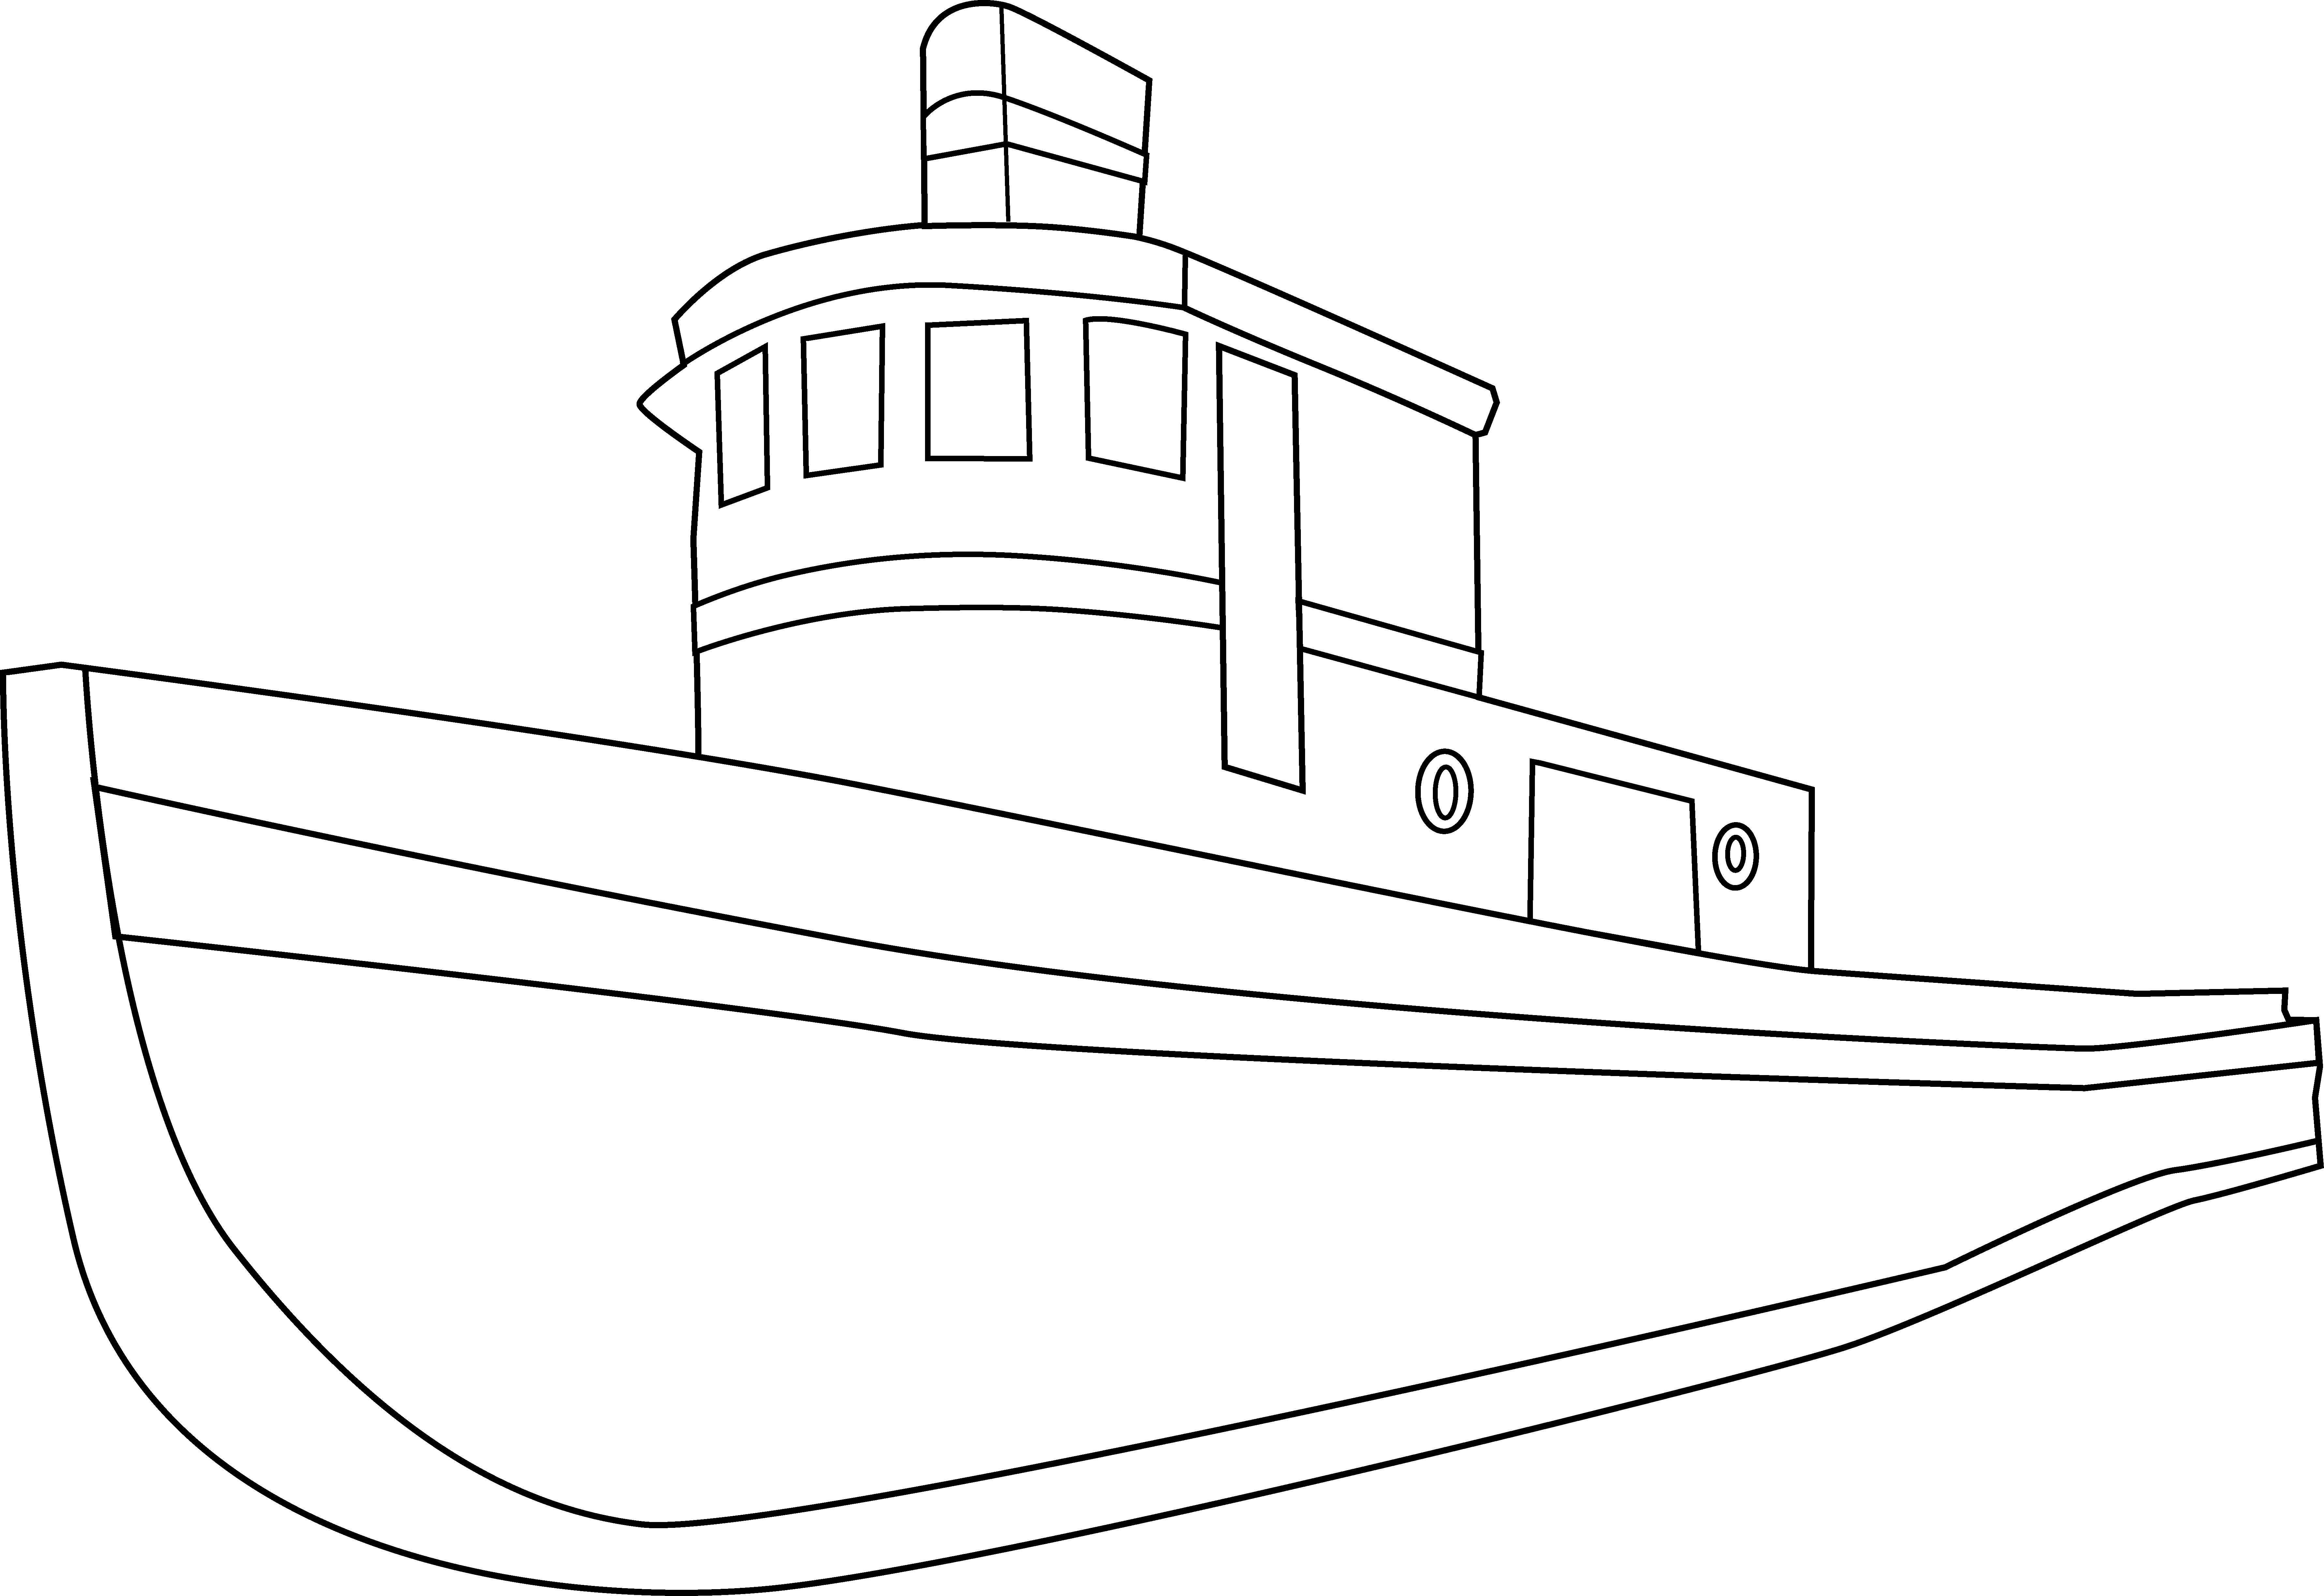 Ship boat clipart black and white free clipart image image